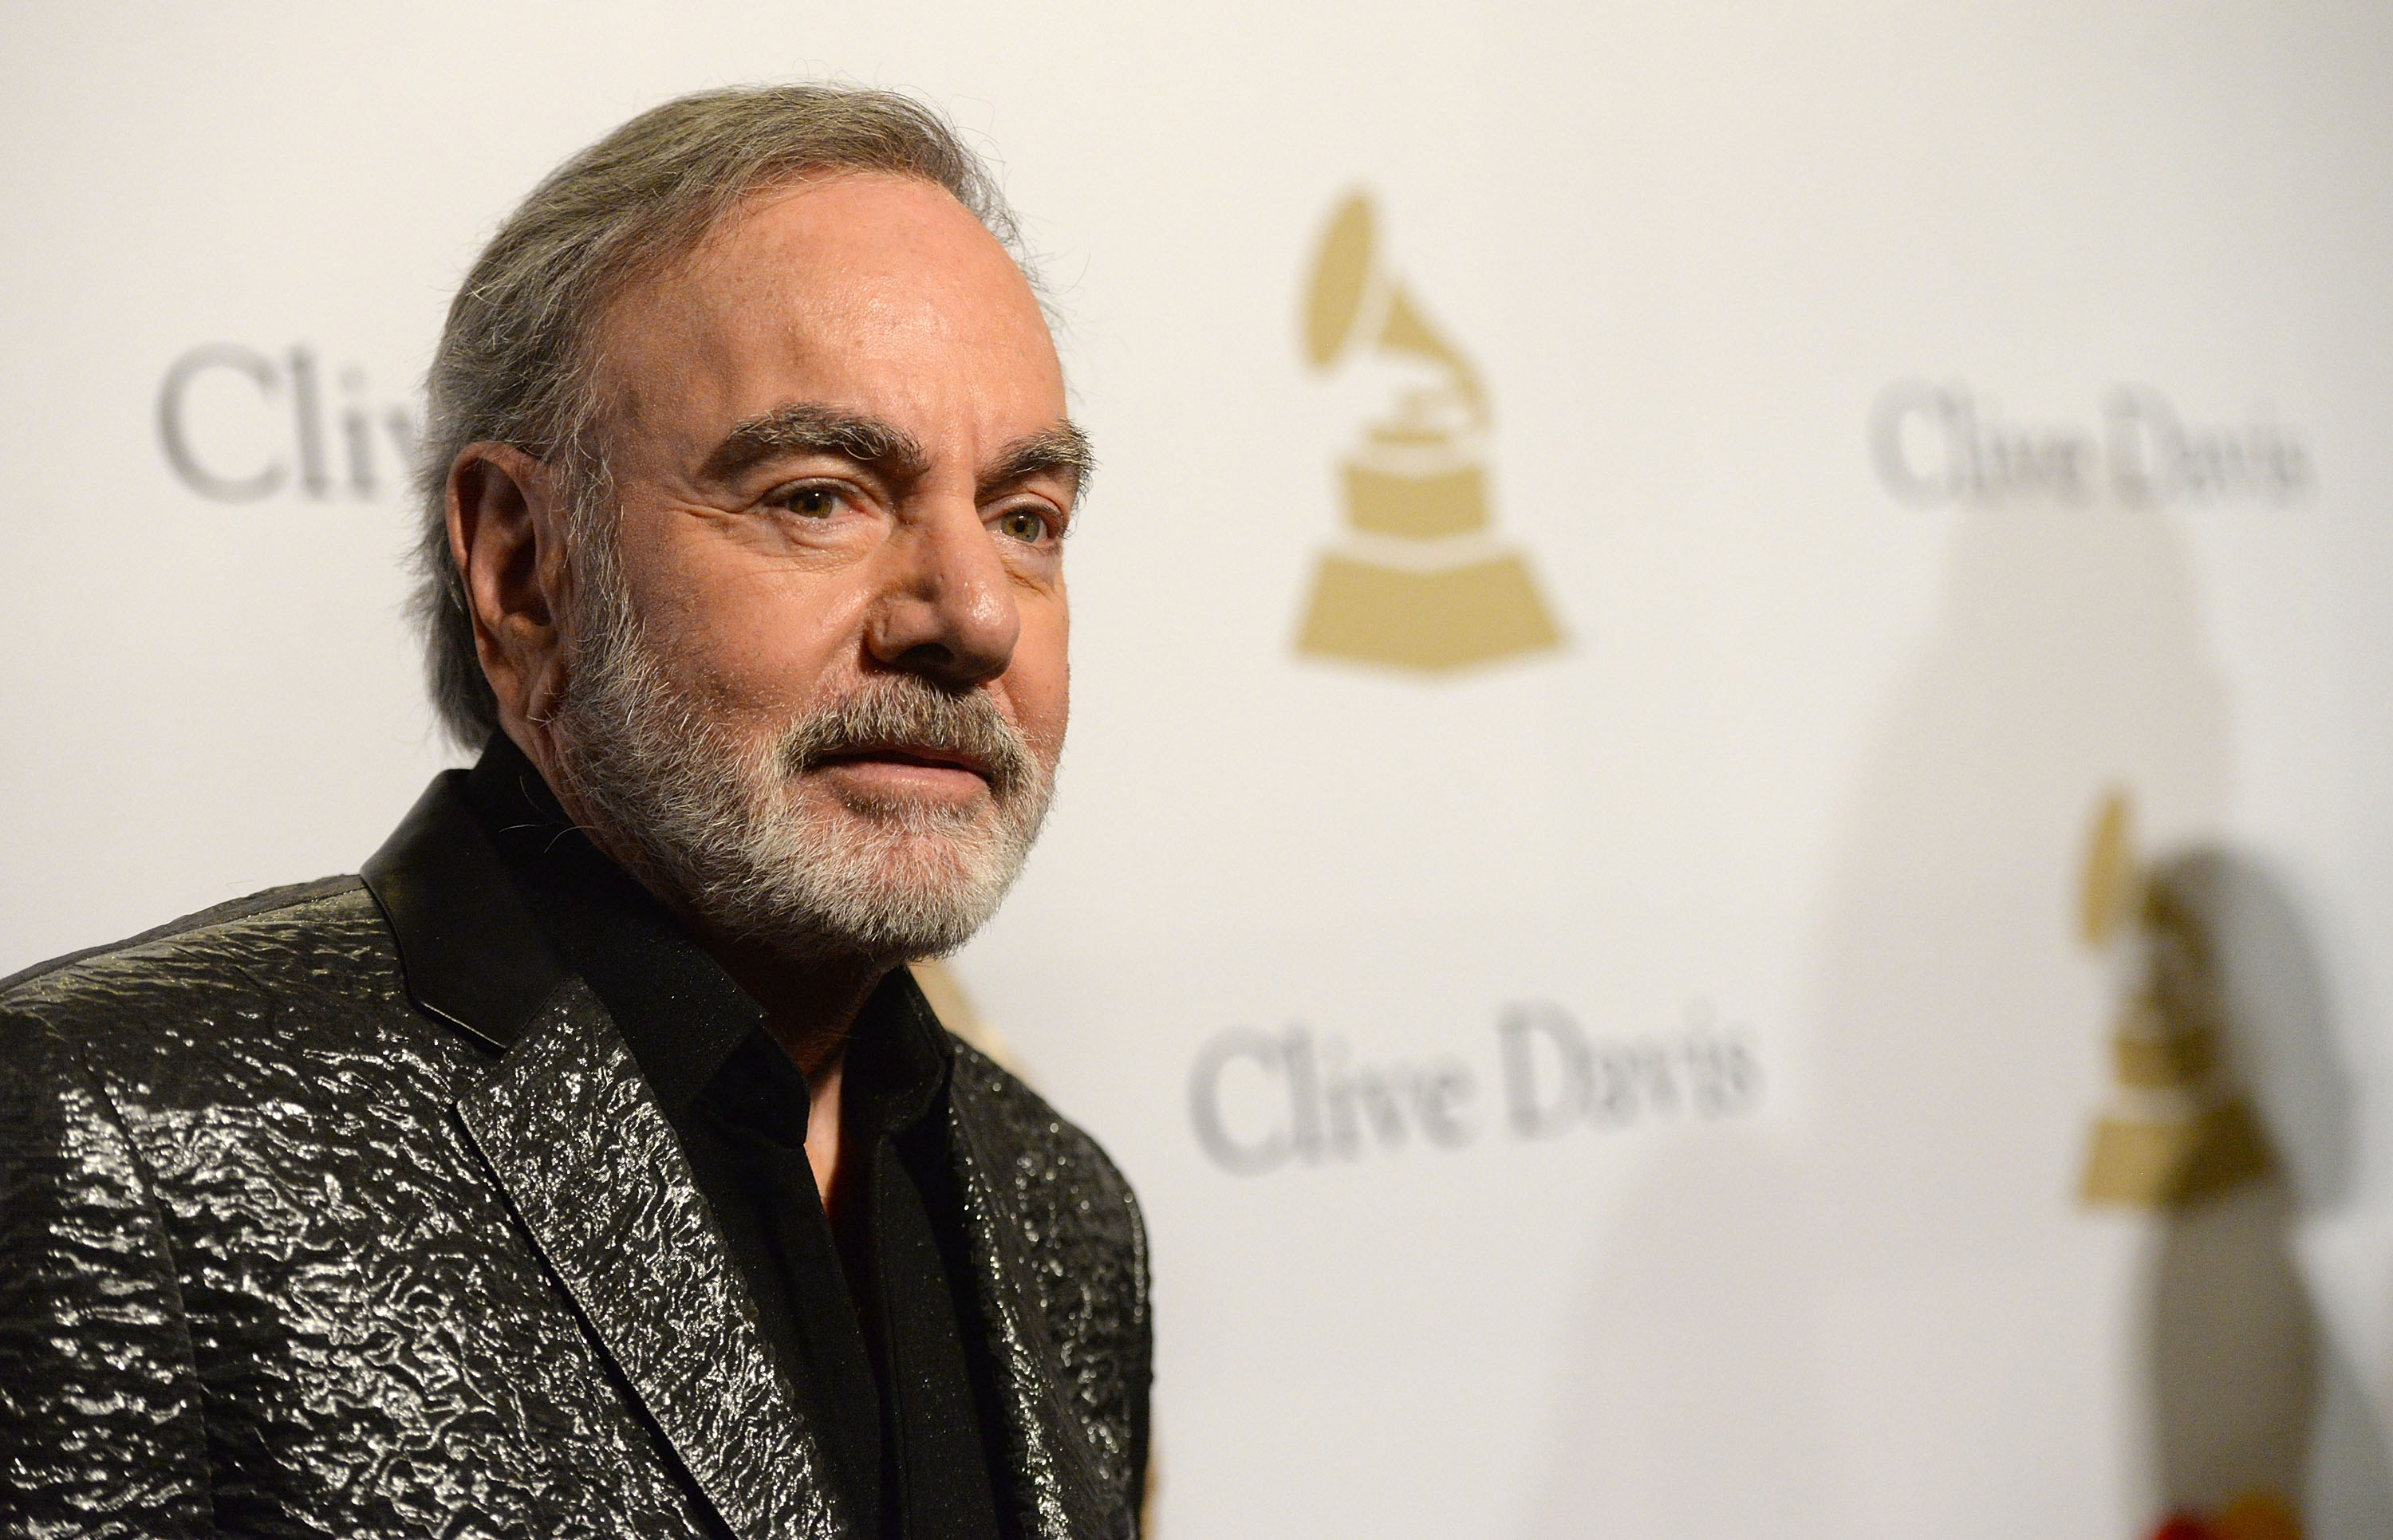 Neil Diamond attends the Clive Davis annual Pre-Grammy Gala in Beverly Hills, California on Feb. 11, 2017. (Scott Dudelson—Getty Images)